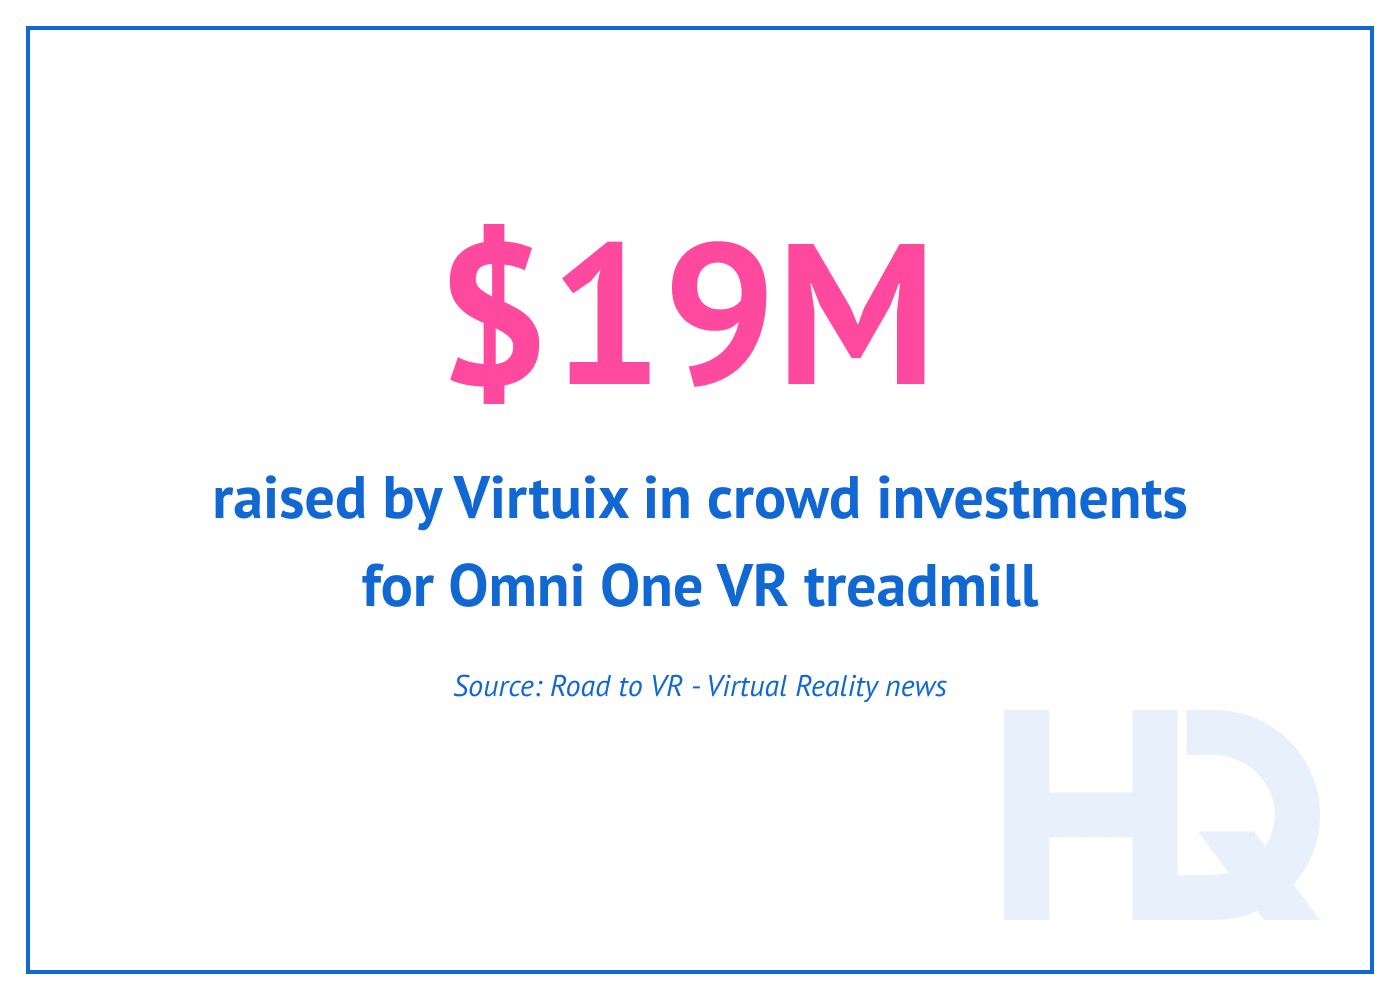 $19M raised by Virtuix  in crowd investments for Omni One VR treadmill